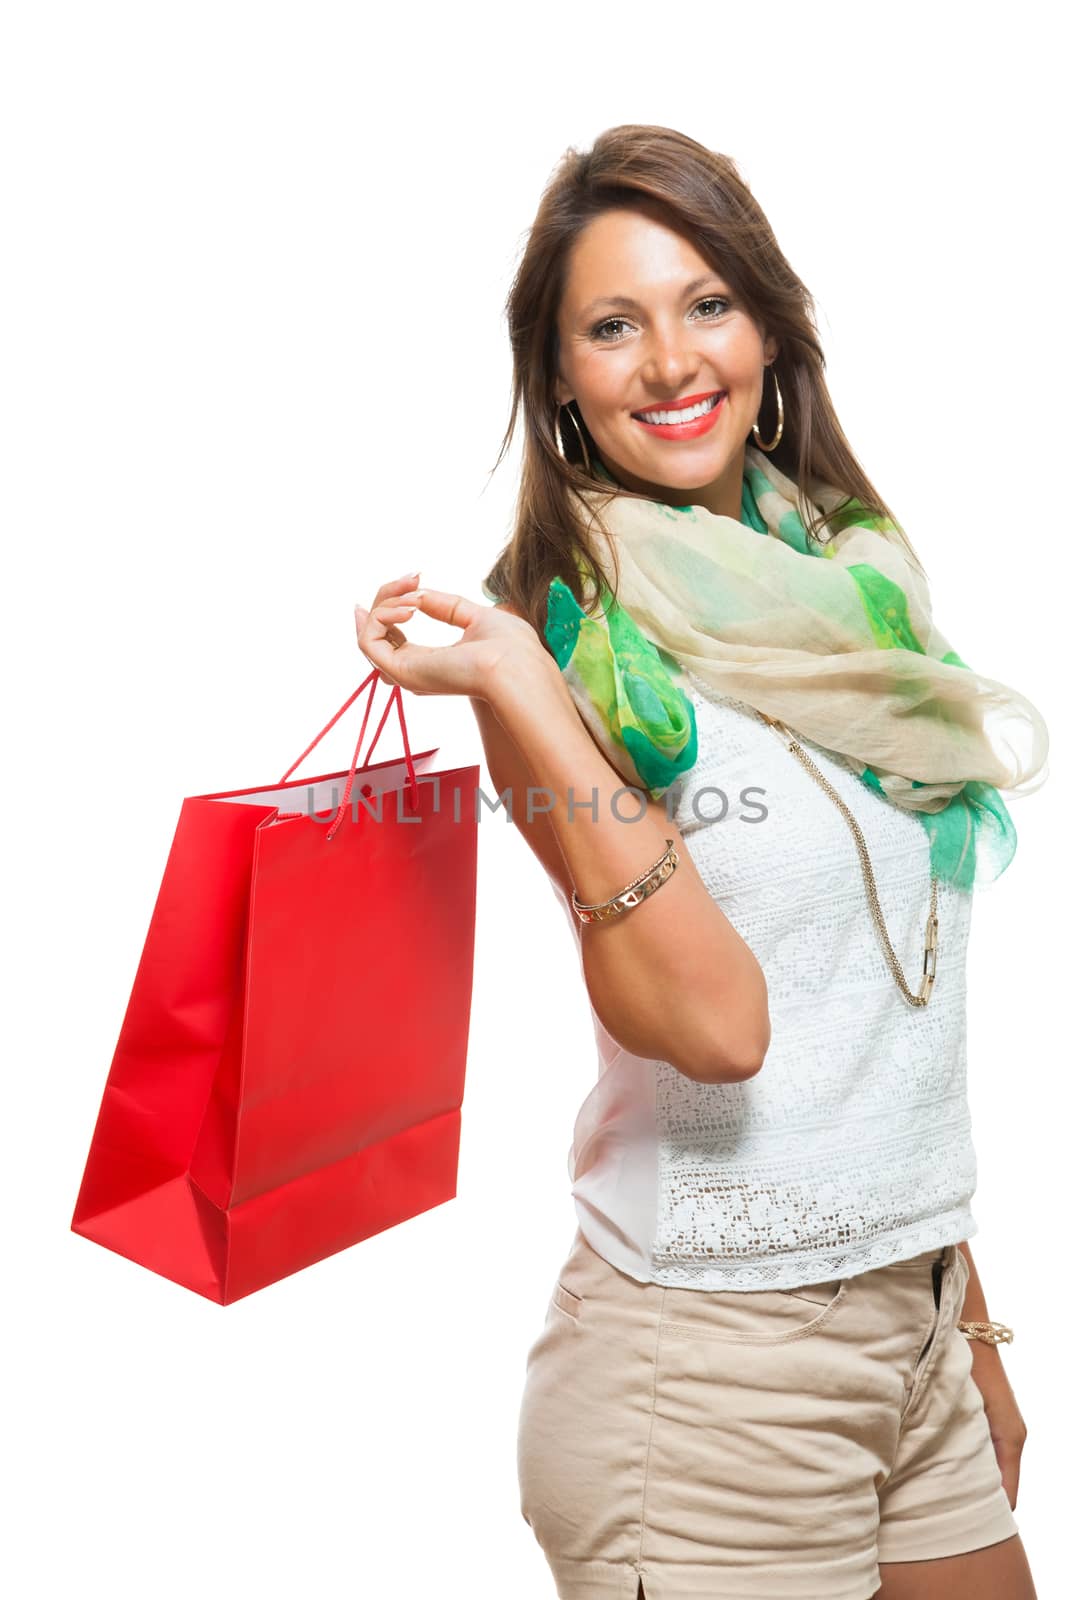 Fashionable Woman Looking Inside a Shopping Bag by juniart